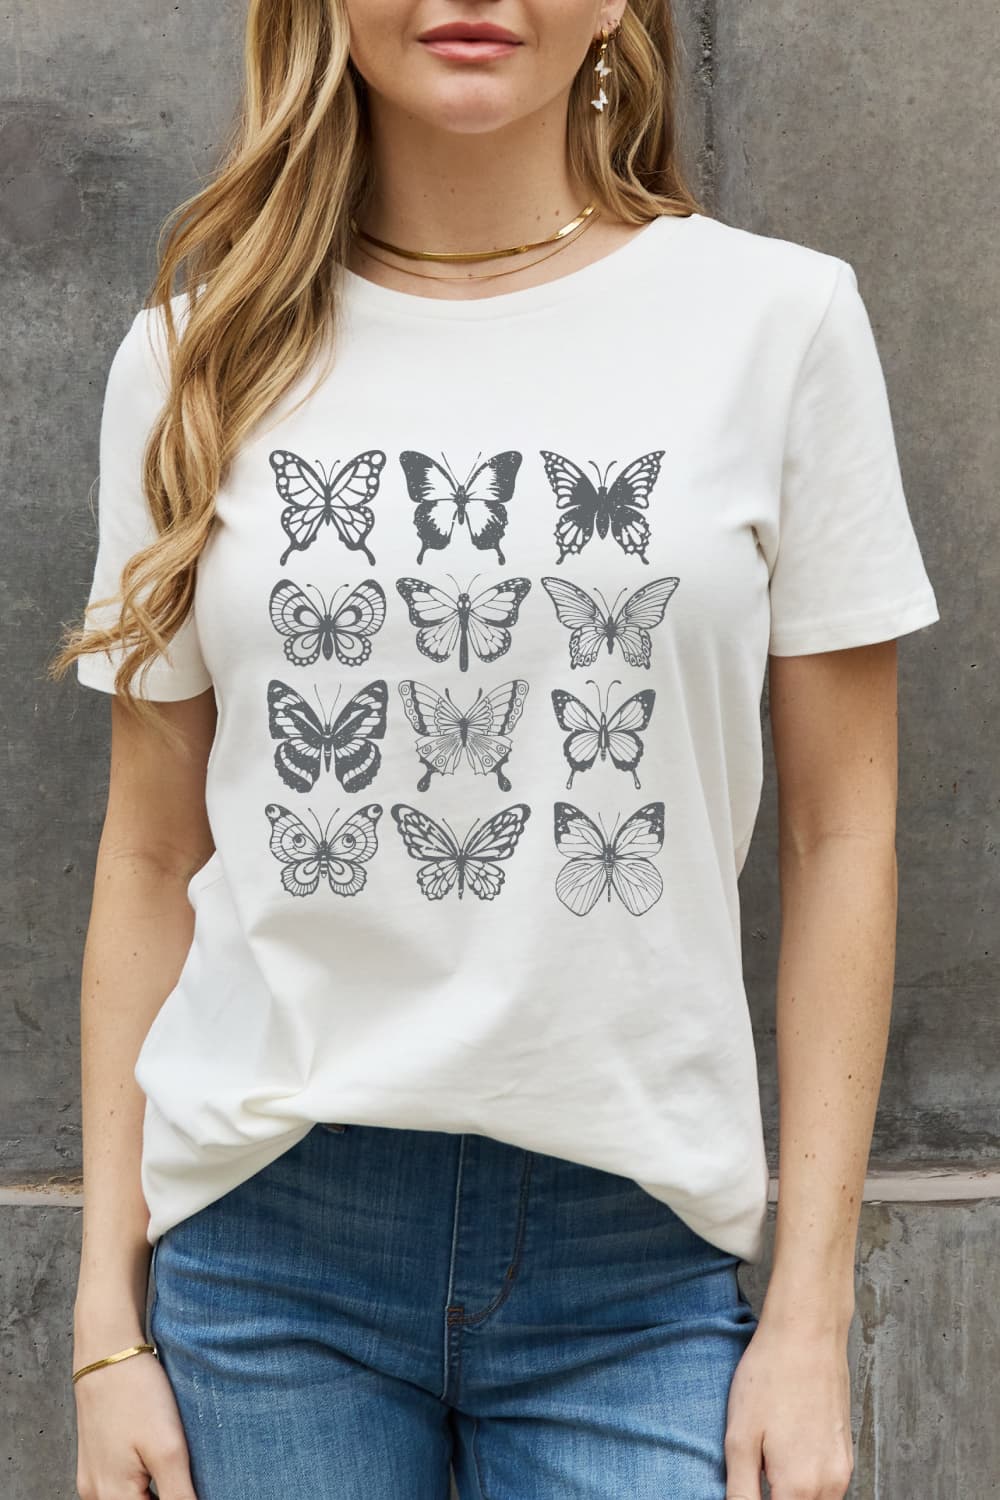 Slate Gray Simply Love Butterfly Graphic Cotton T-Shirt